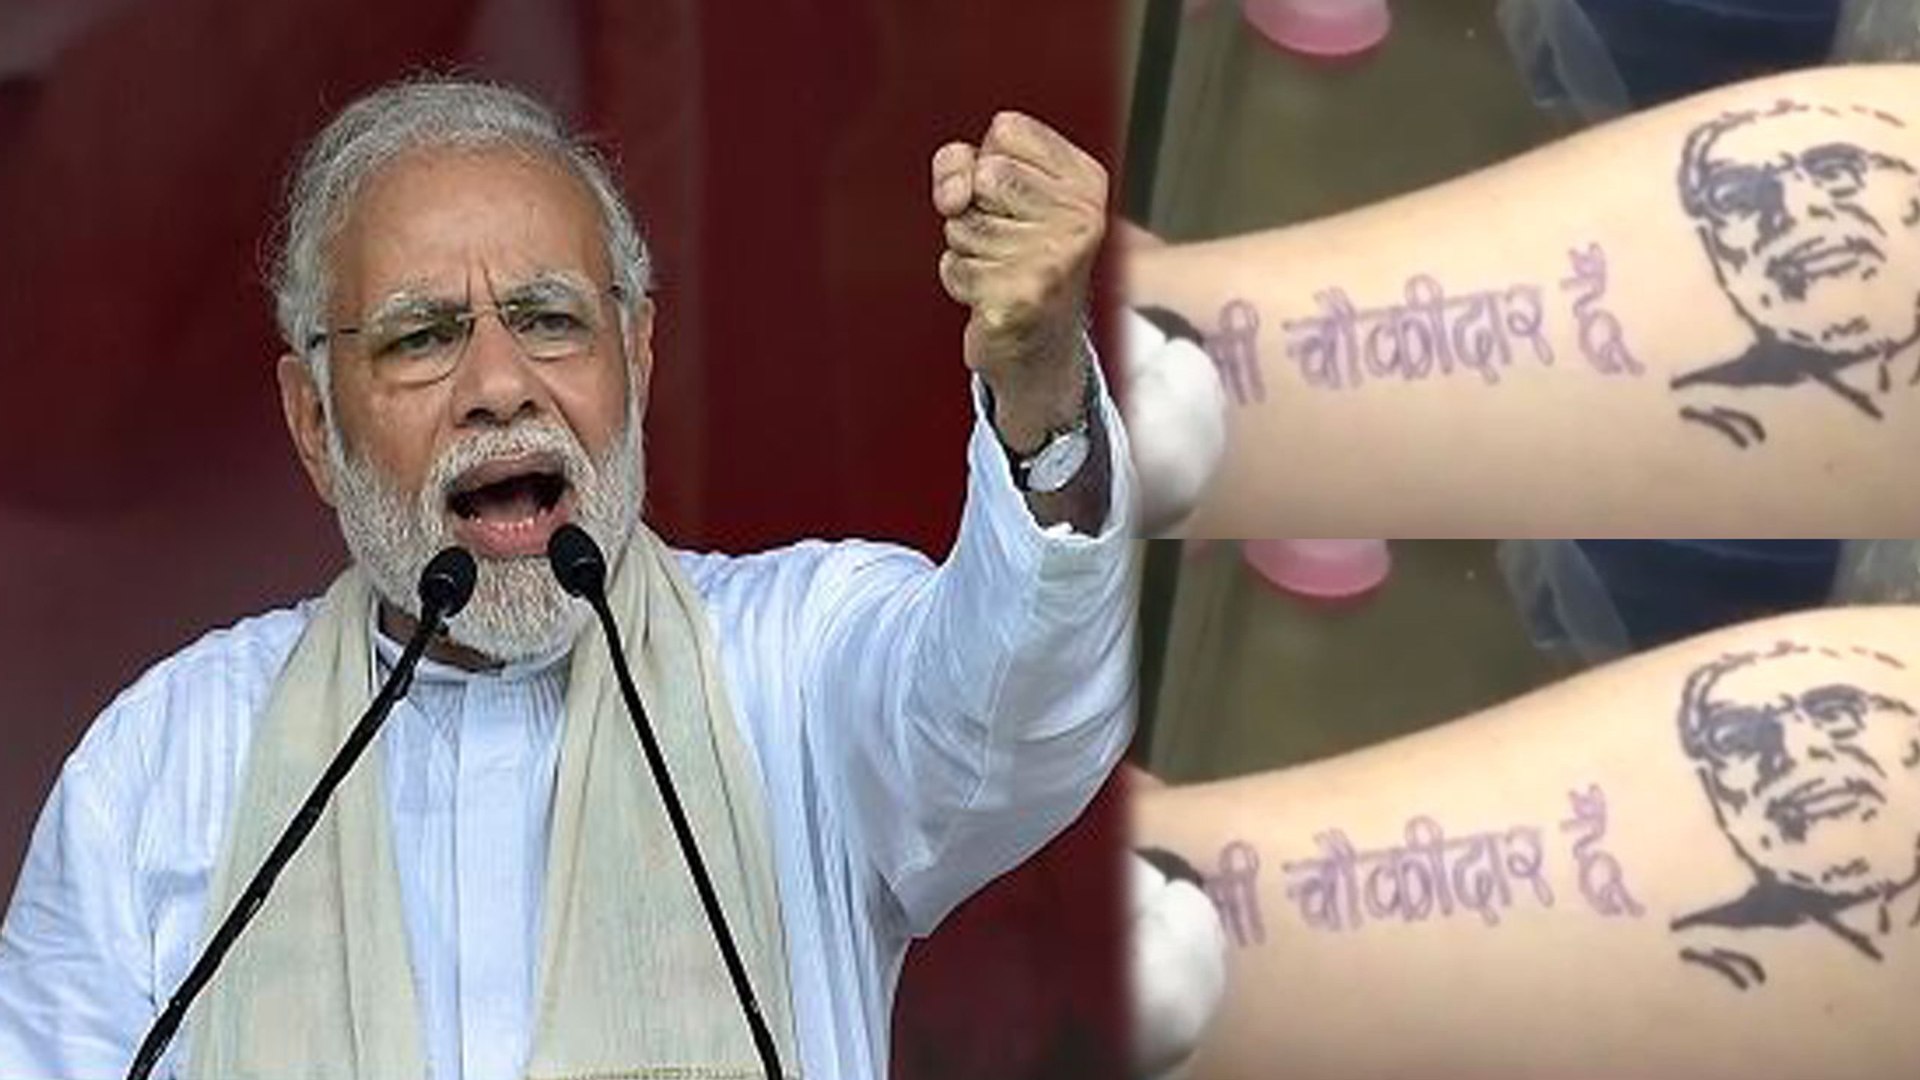 Main Bhi Chowkidar Campaign gains momentum, BJP workers gets Tattoo to  support it | Oneindia News - video Dailymotion